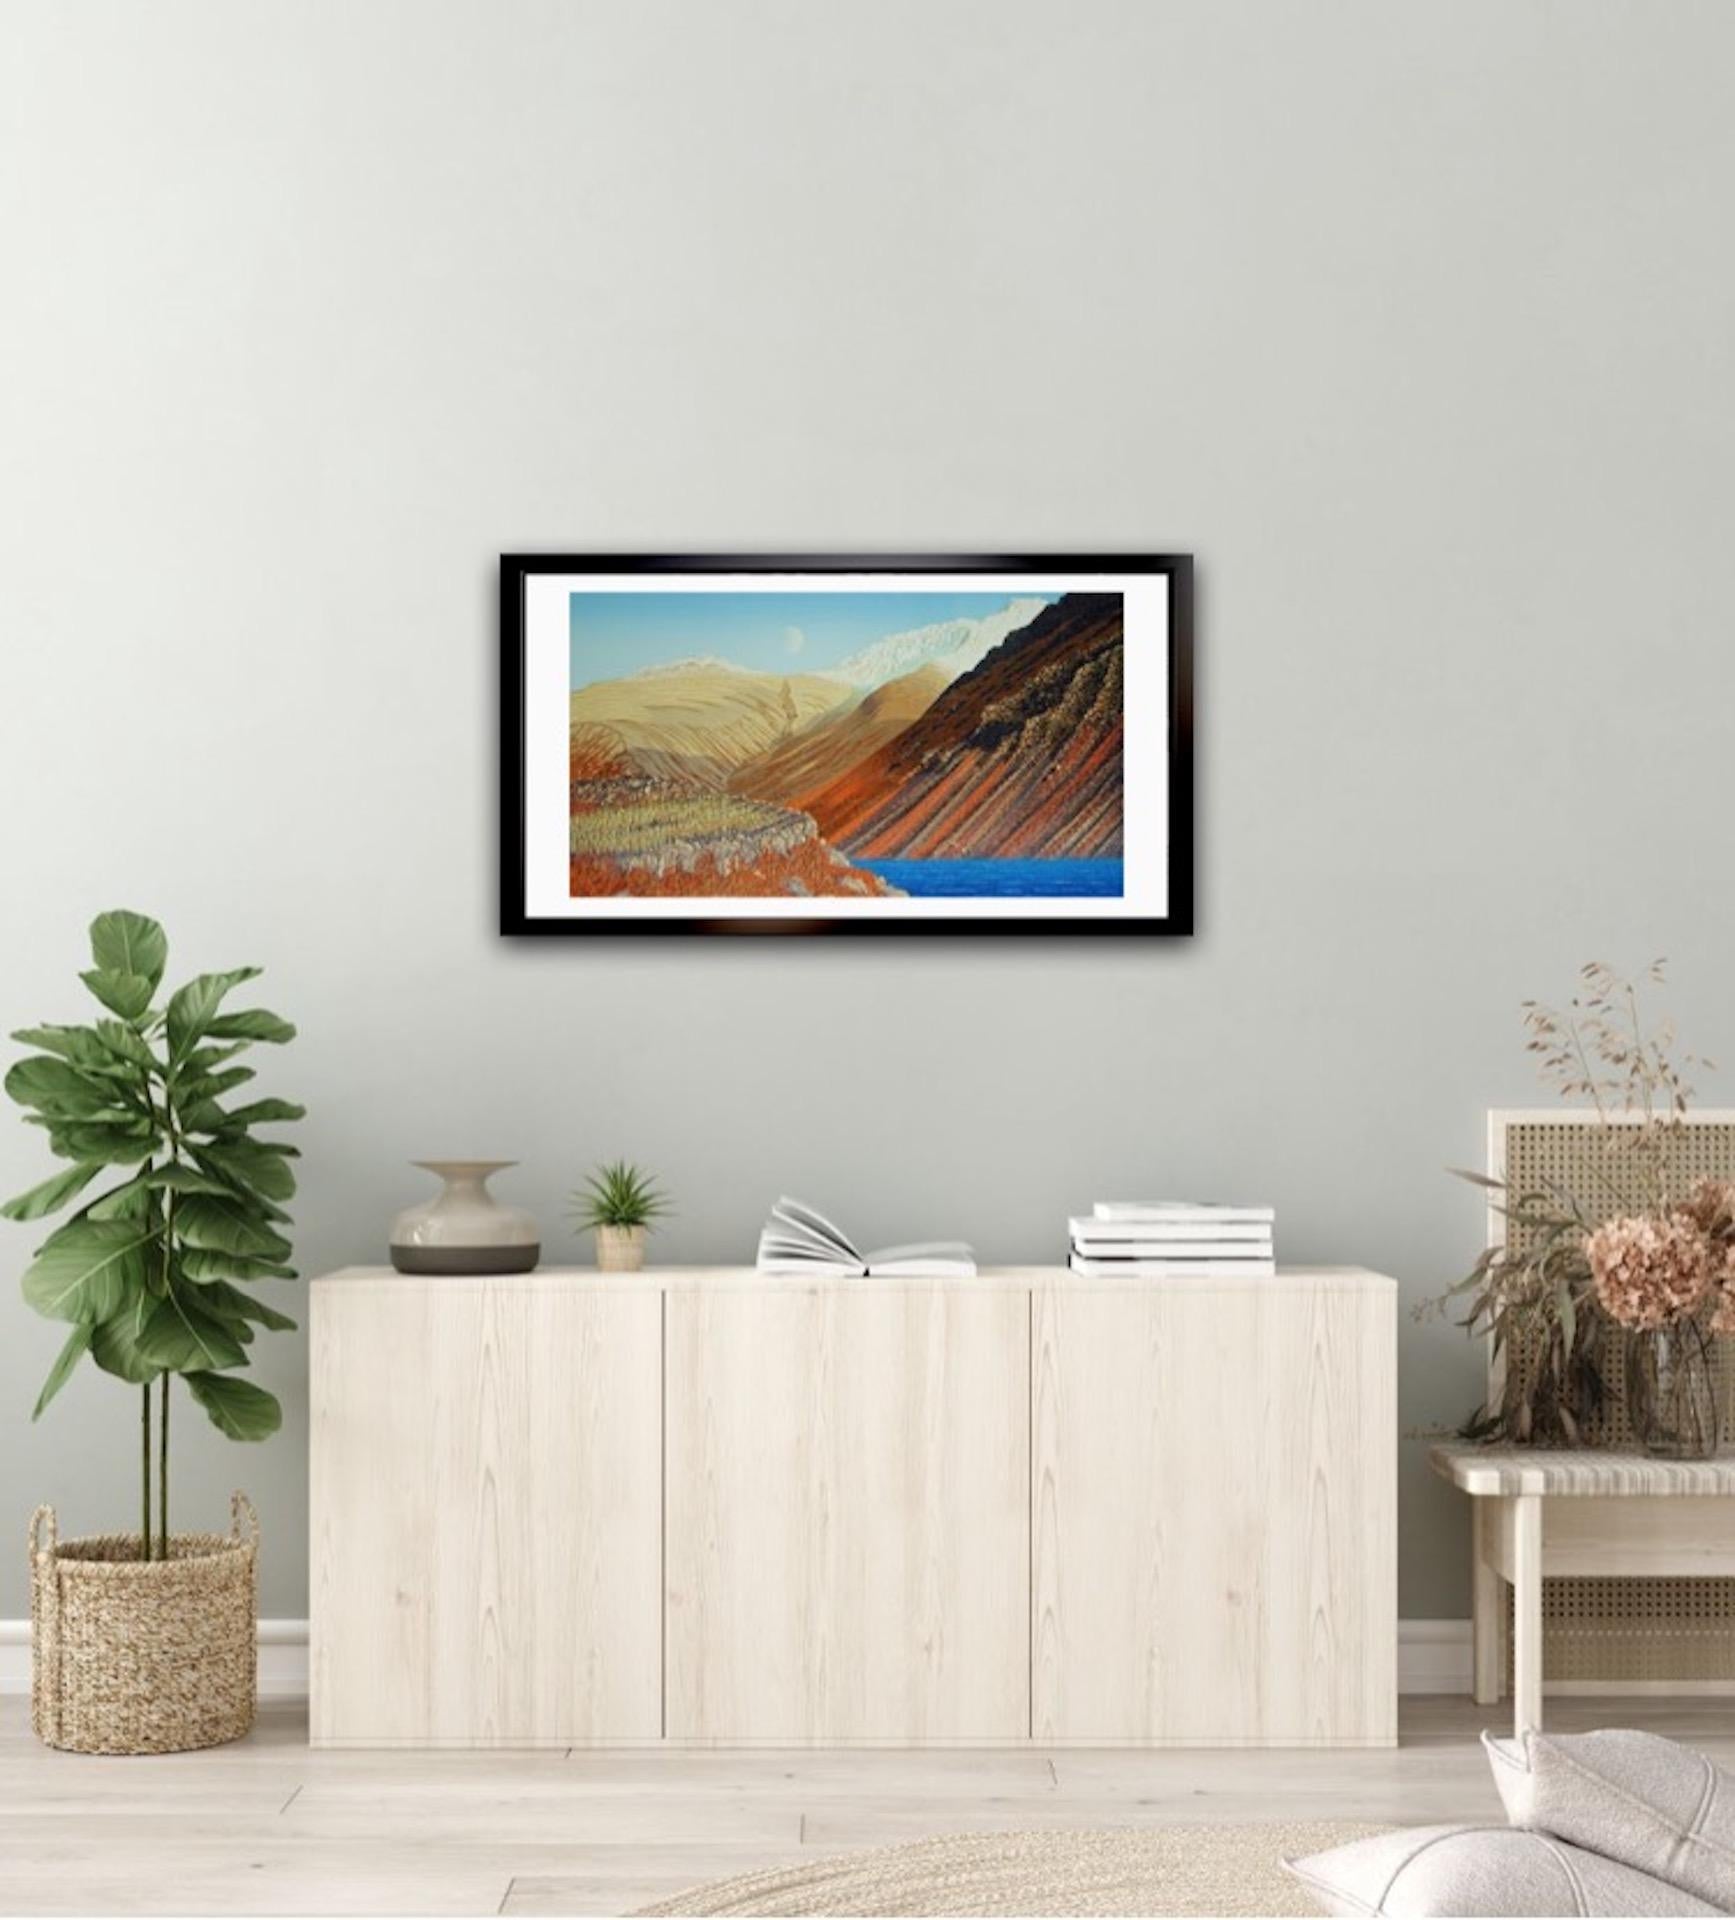 Mark A Pearce
Moon Rising over Wastewater
Limited Edition Landscape Print
Edition of 32
Sold Mounted but Unframed
Image size: H 36.5cm x W 60cm
Mount size: H 52.5cm x W 76cm x D 0.5cm
Sold Unframed
Please note that insitu images are purely an